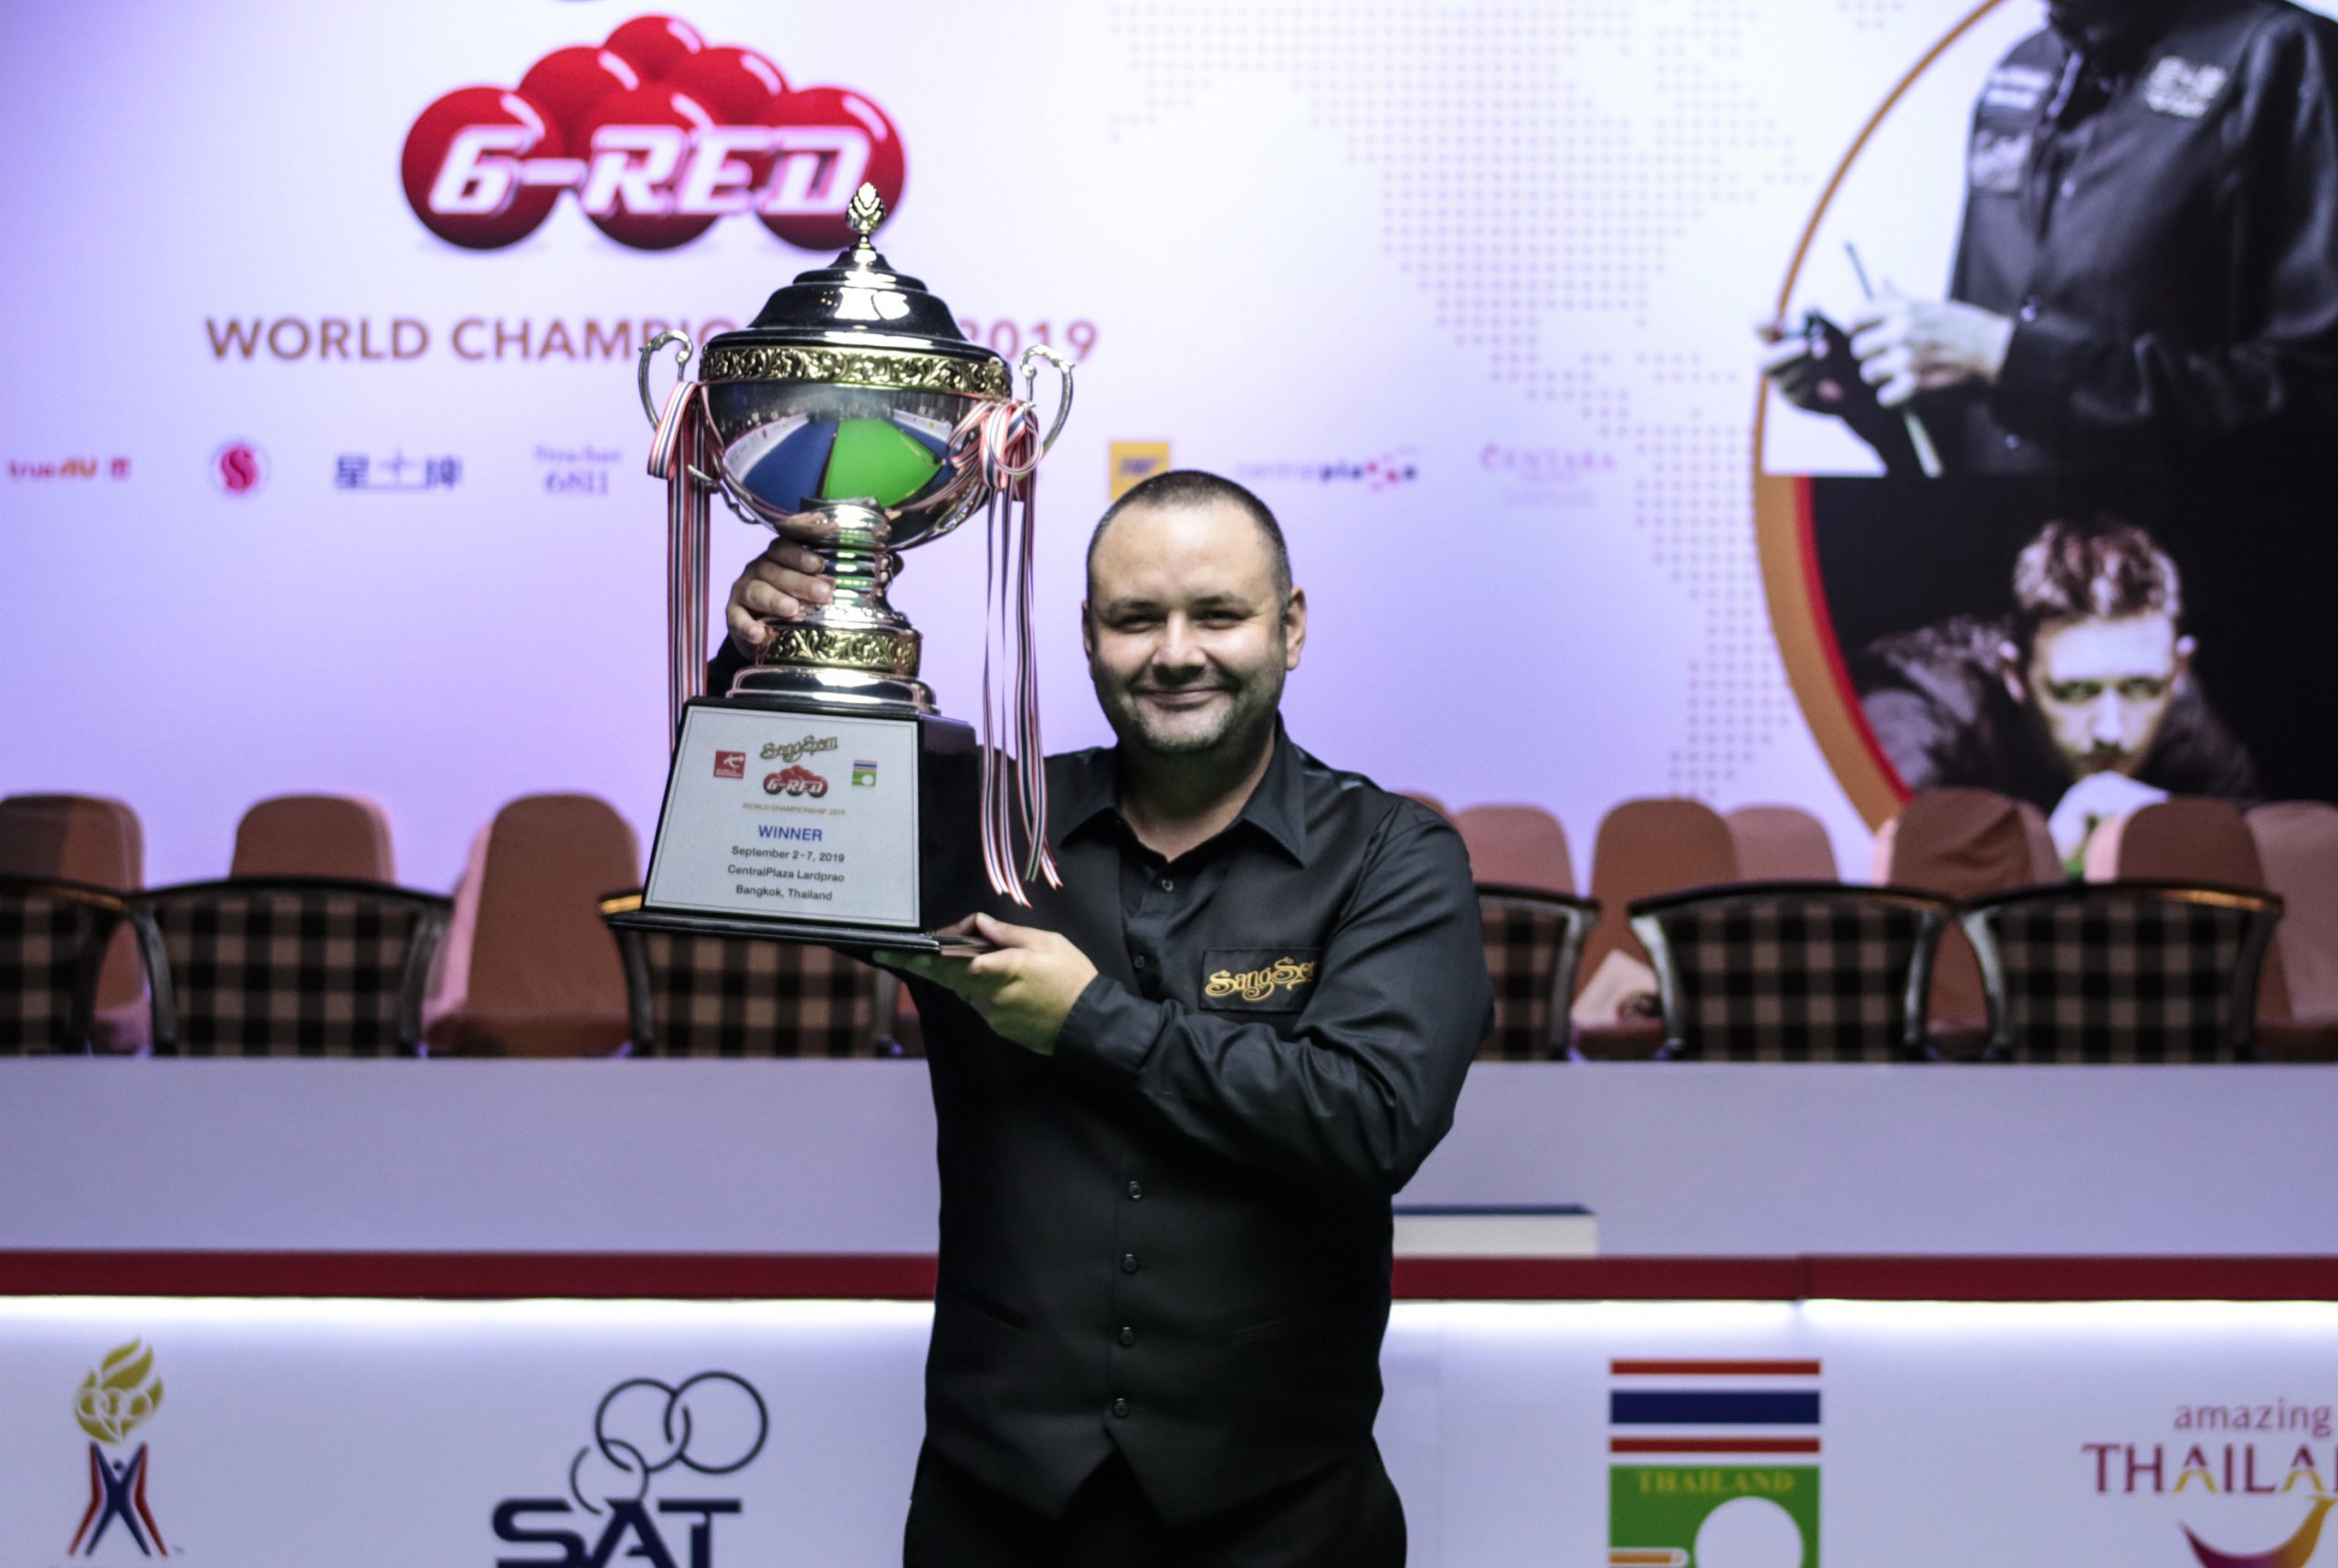 Maguire Wins SangSom 6Red World Championship for Second Time WSF